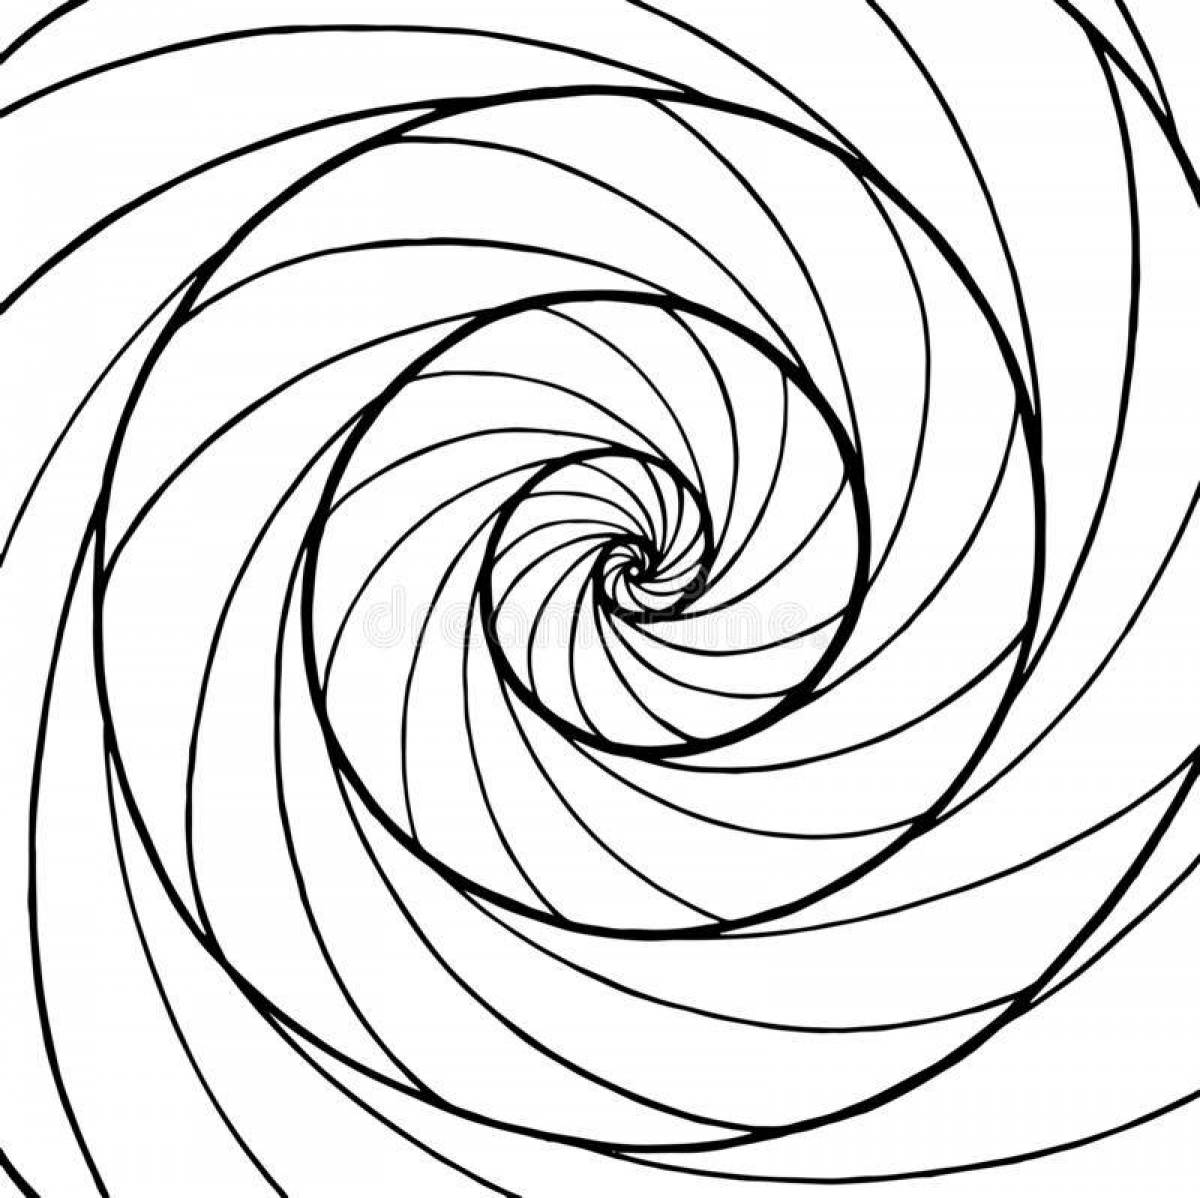 Spiral create from photo #7